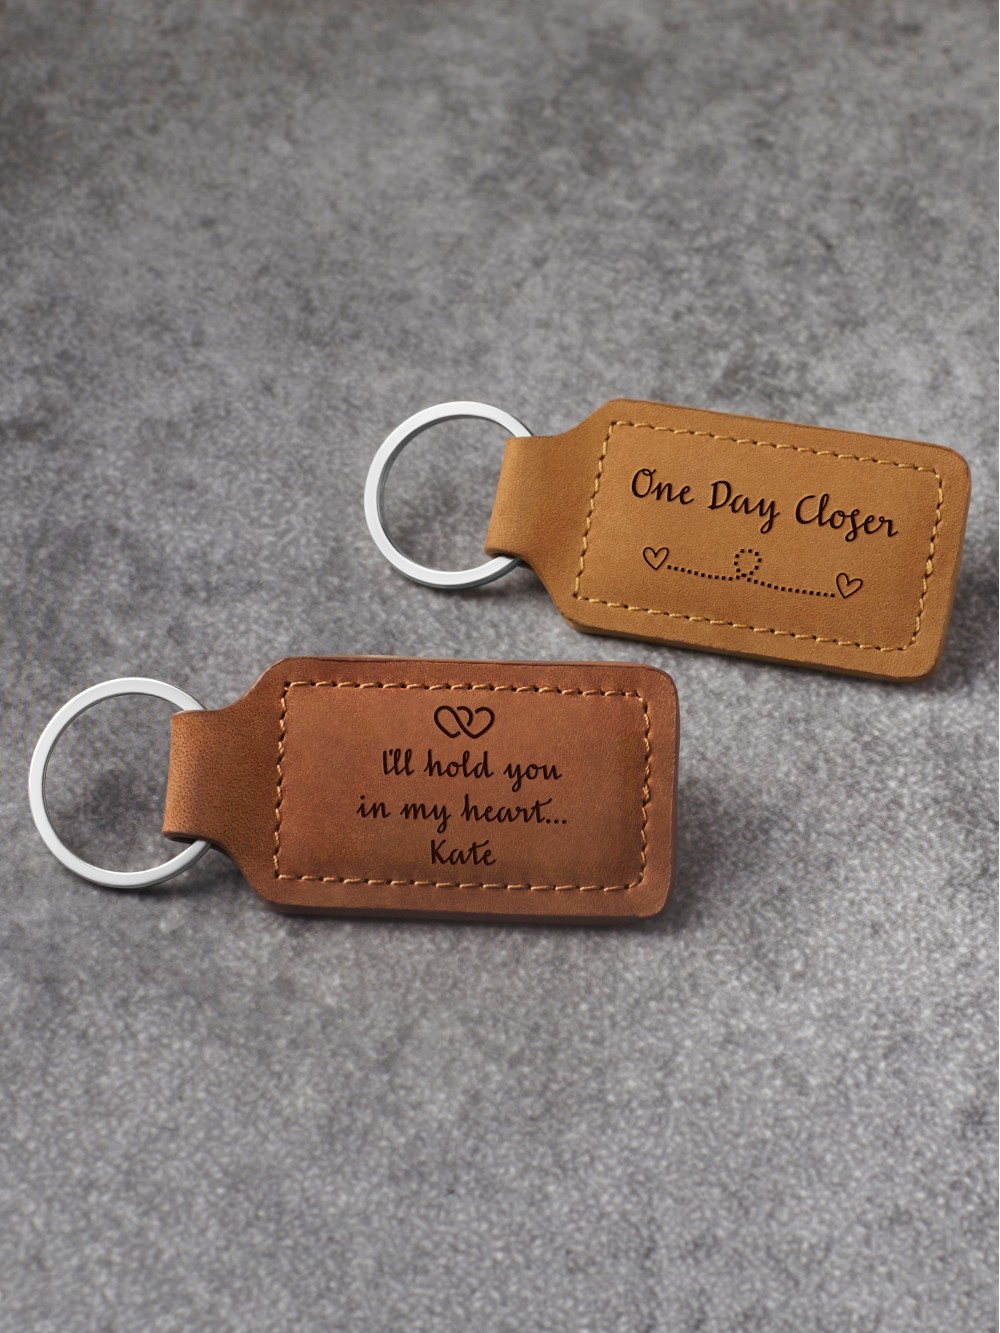 Long Distance Relationship Keychains - One Day Closer